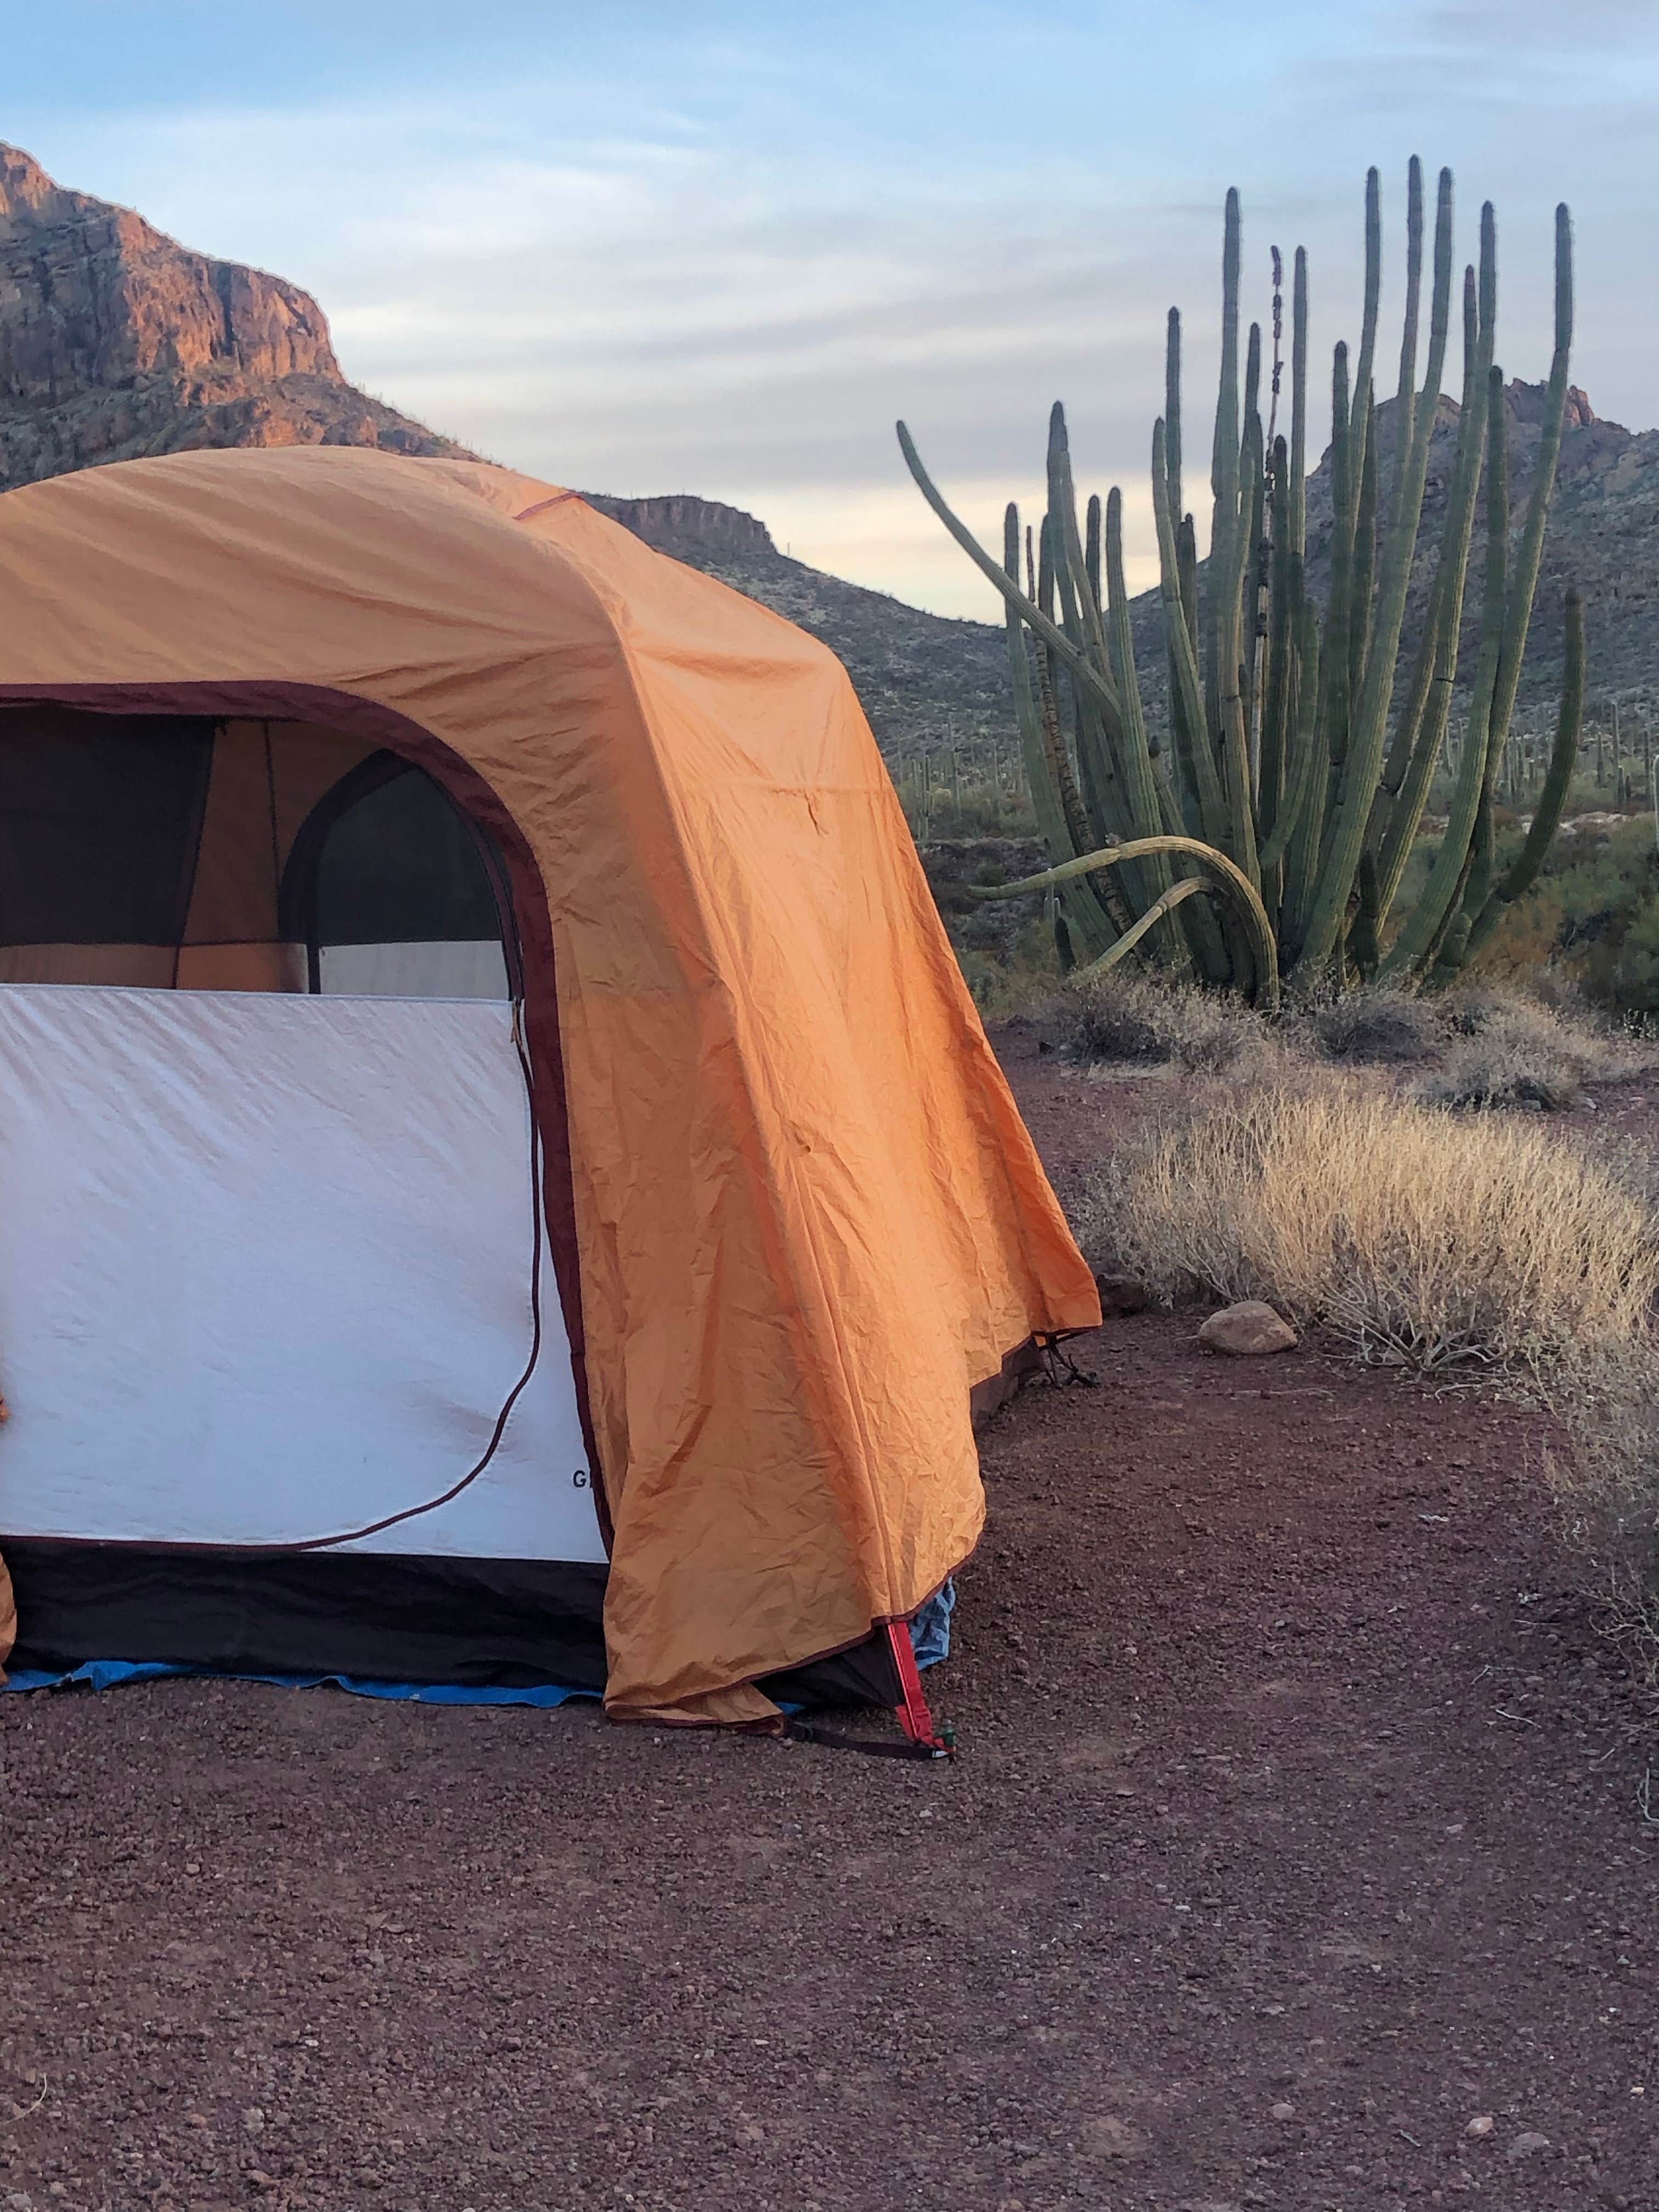 Camper submitted image from Alamo Canyon Primitive Campground — Organ Pipe Cactus National Monument - 5